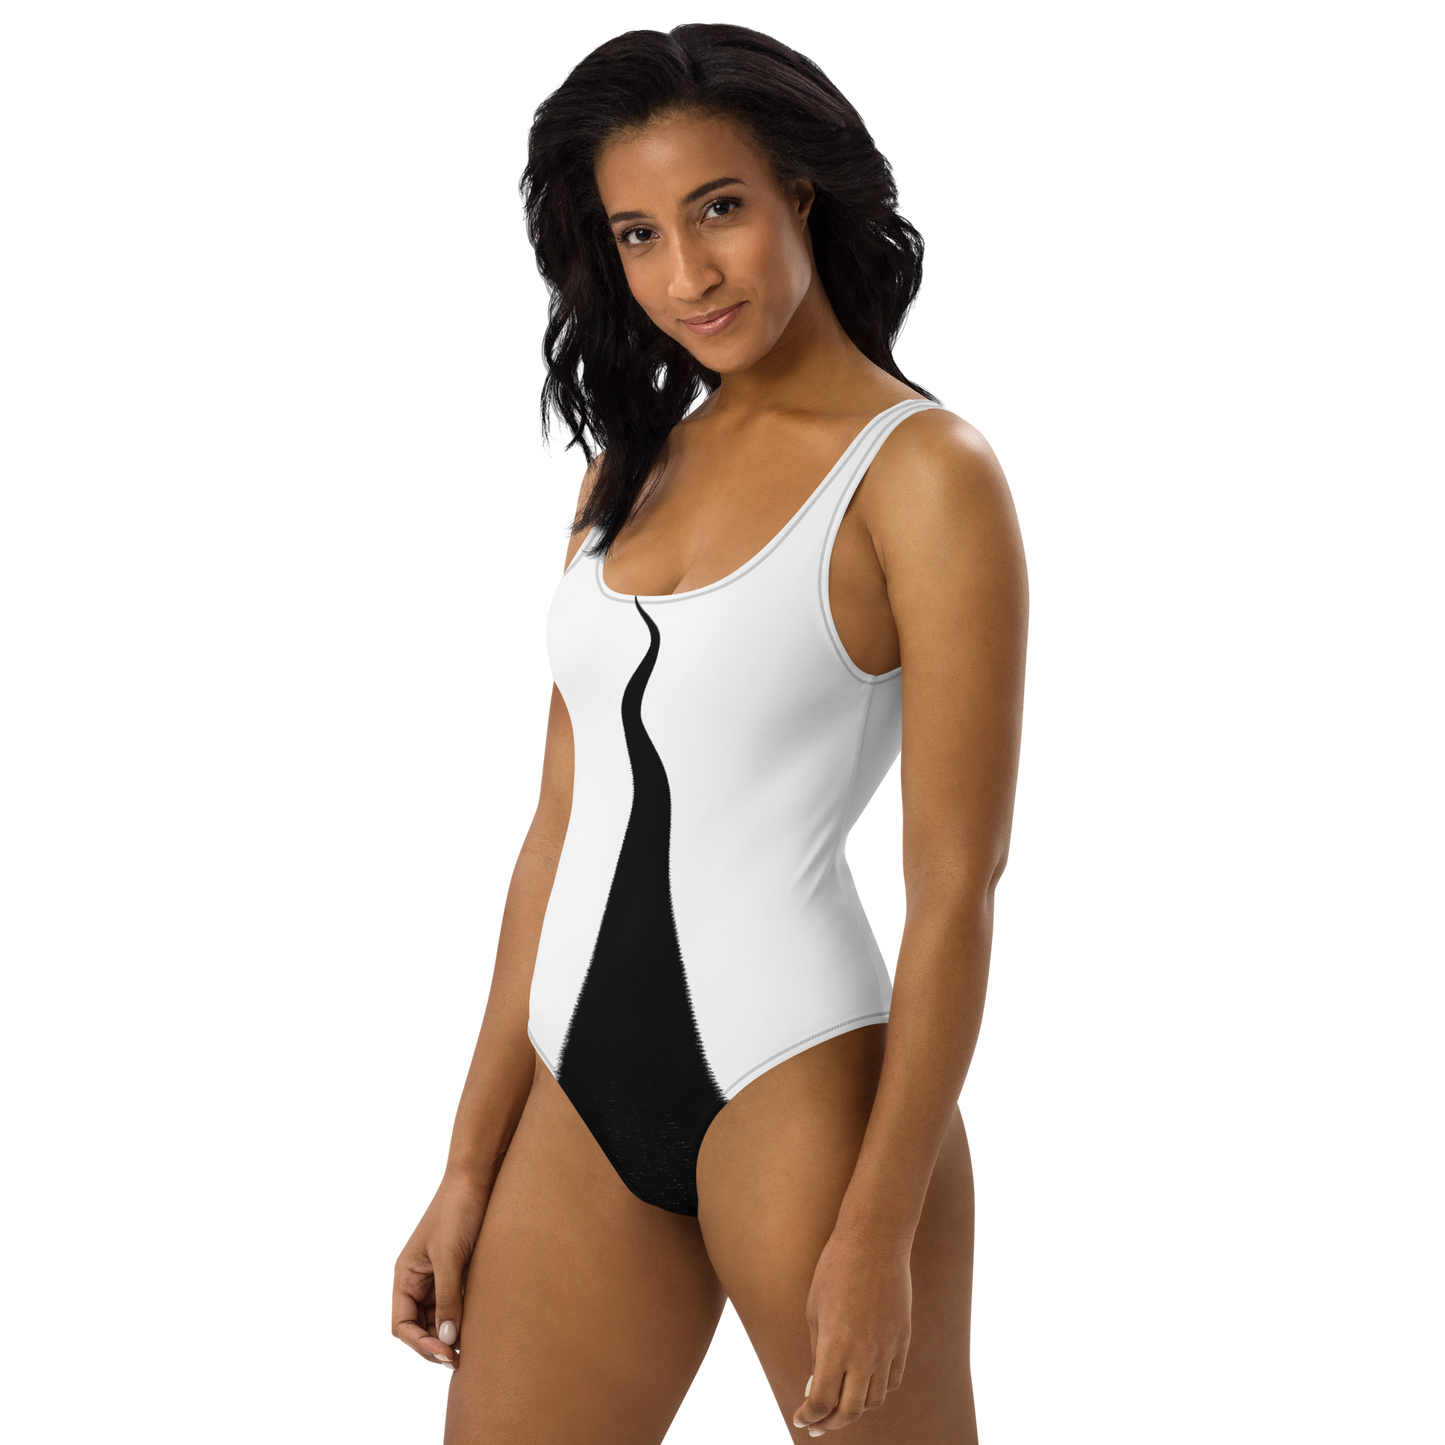 One-Piece Swimsuit. Make Waves in Style with our Tornado-Inspired Swimsuit!